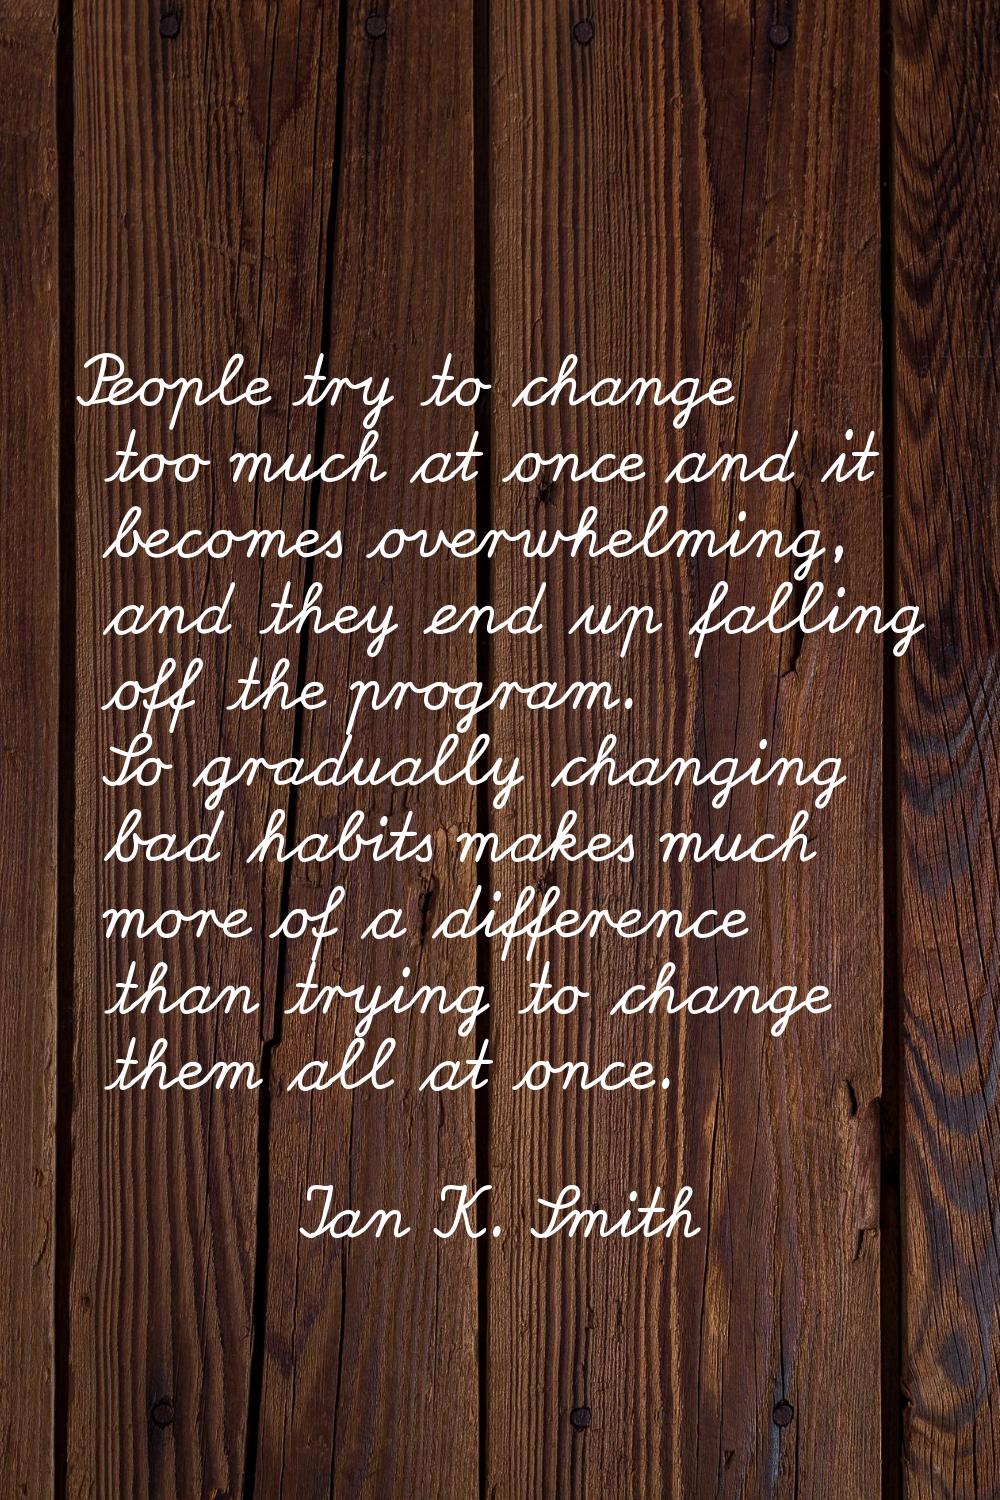 People try to change too much at once and it becomes overwhelming, and they end up falling off the 